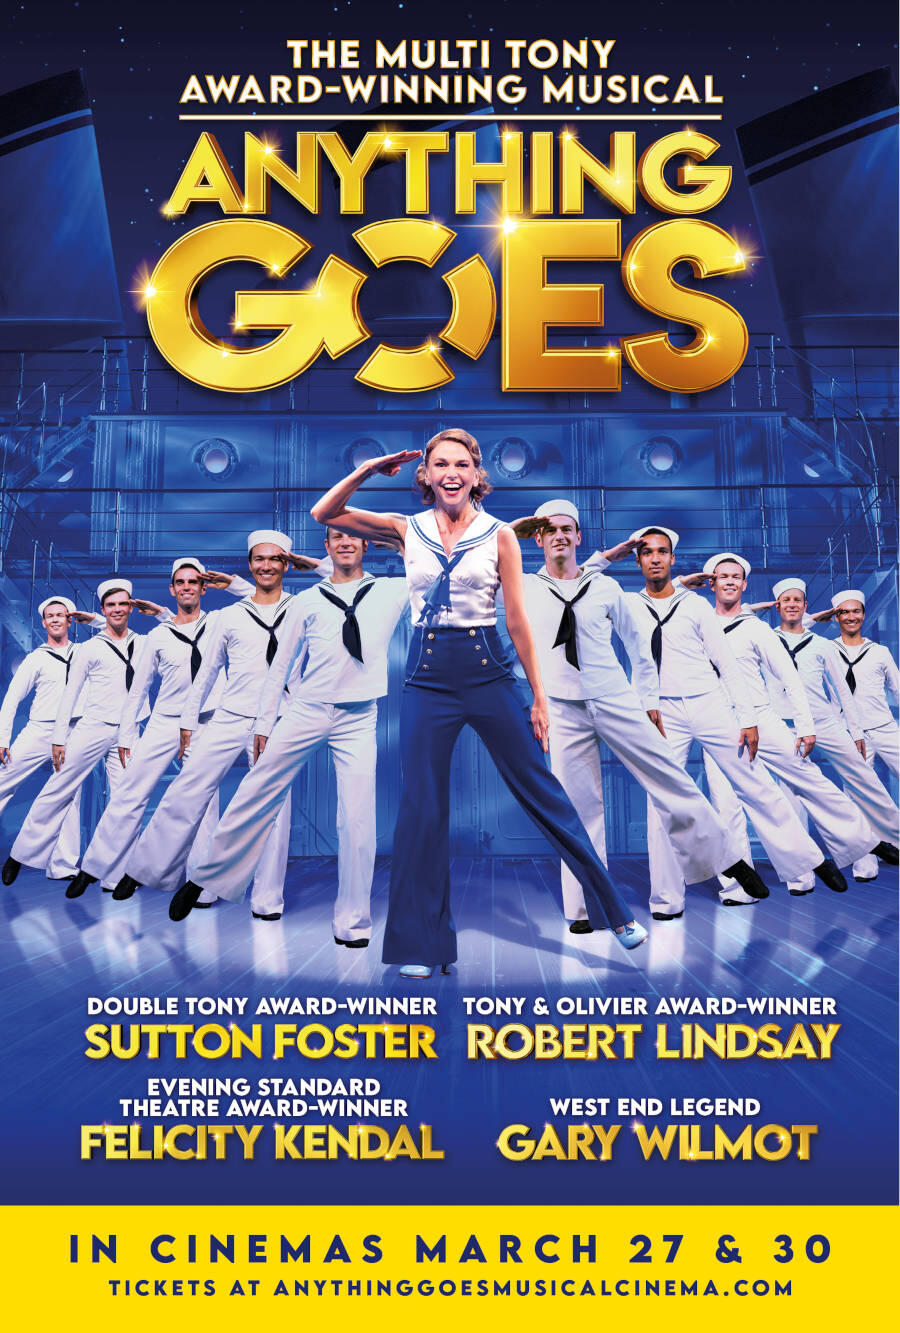 Anything Goes - The Musical (2022) Showtimes | Fandango